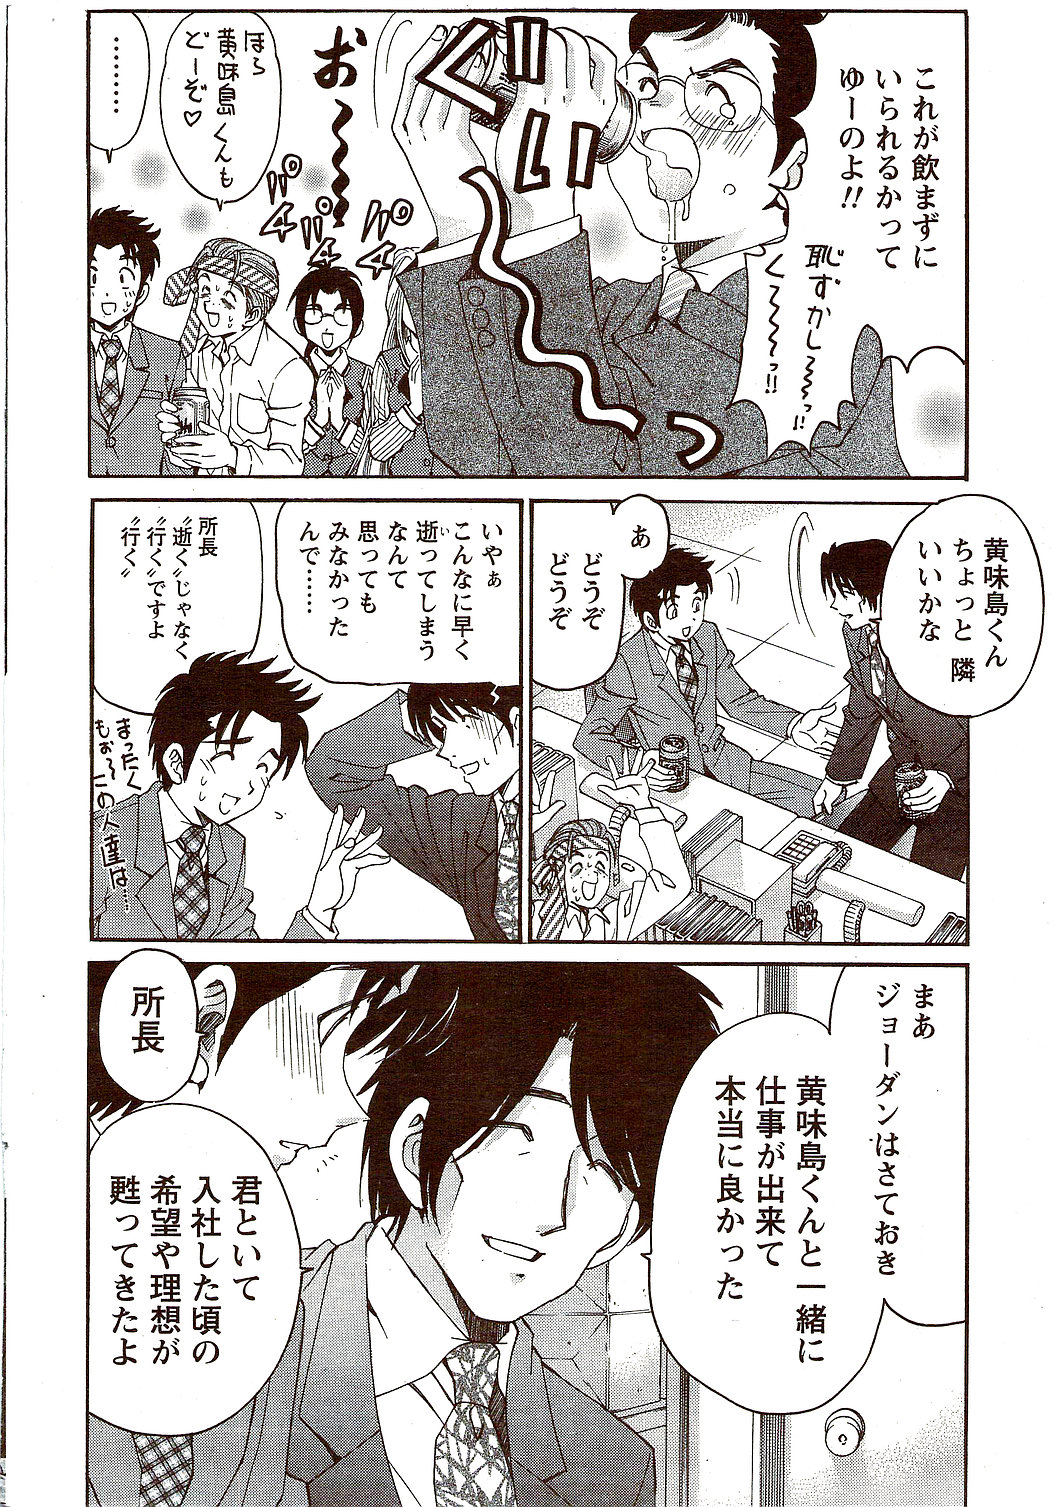 Monthly Vitaman 2009-10 page 20 full